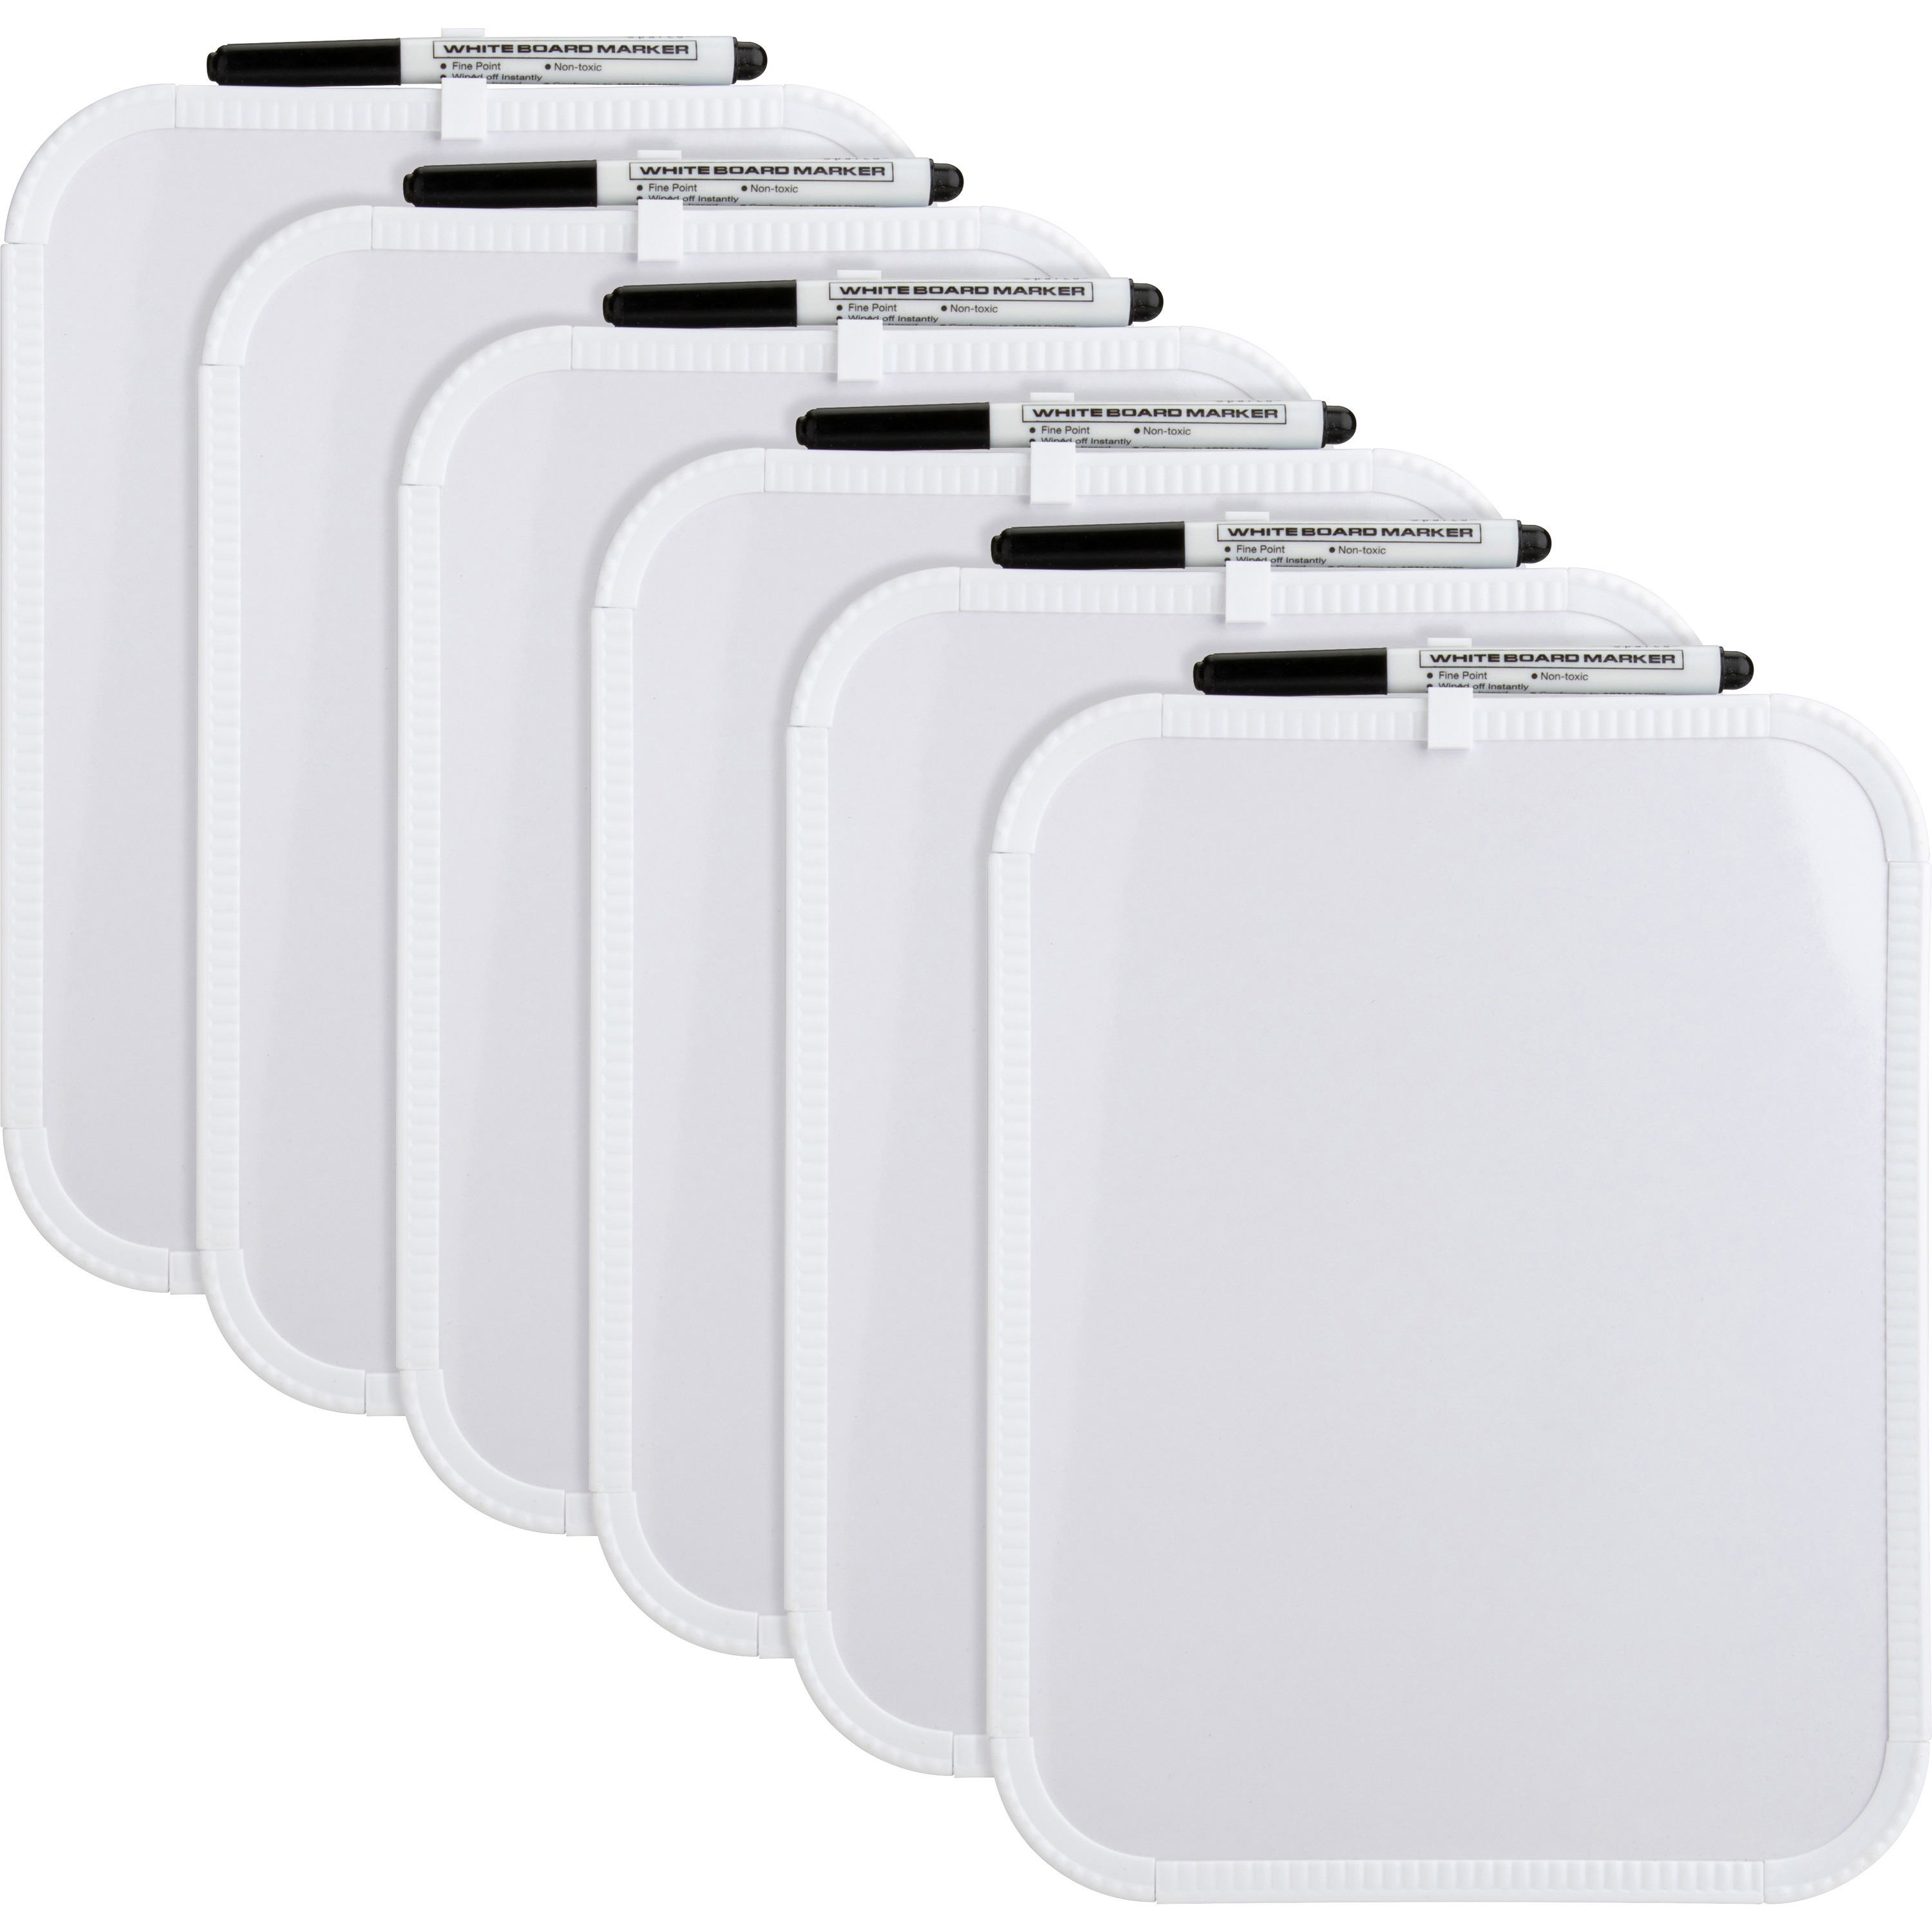 personal whiteboards